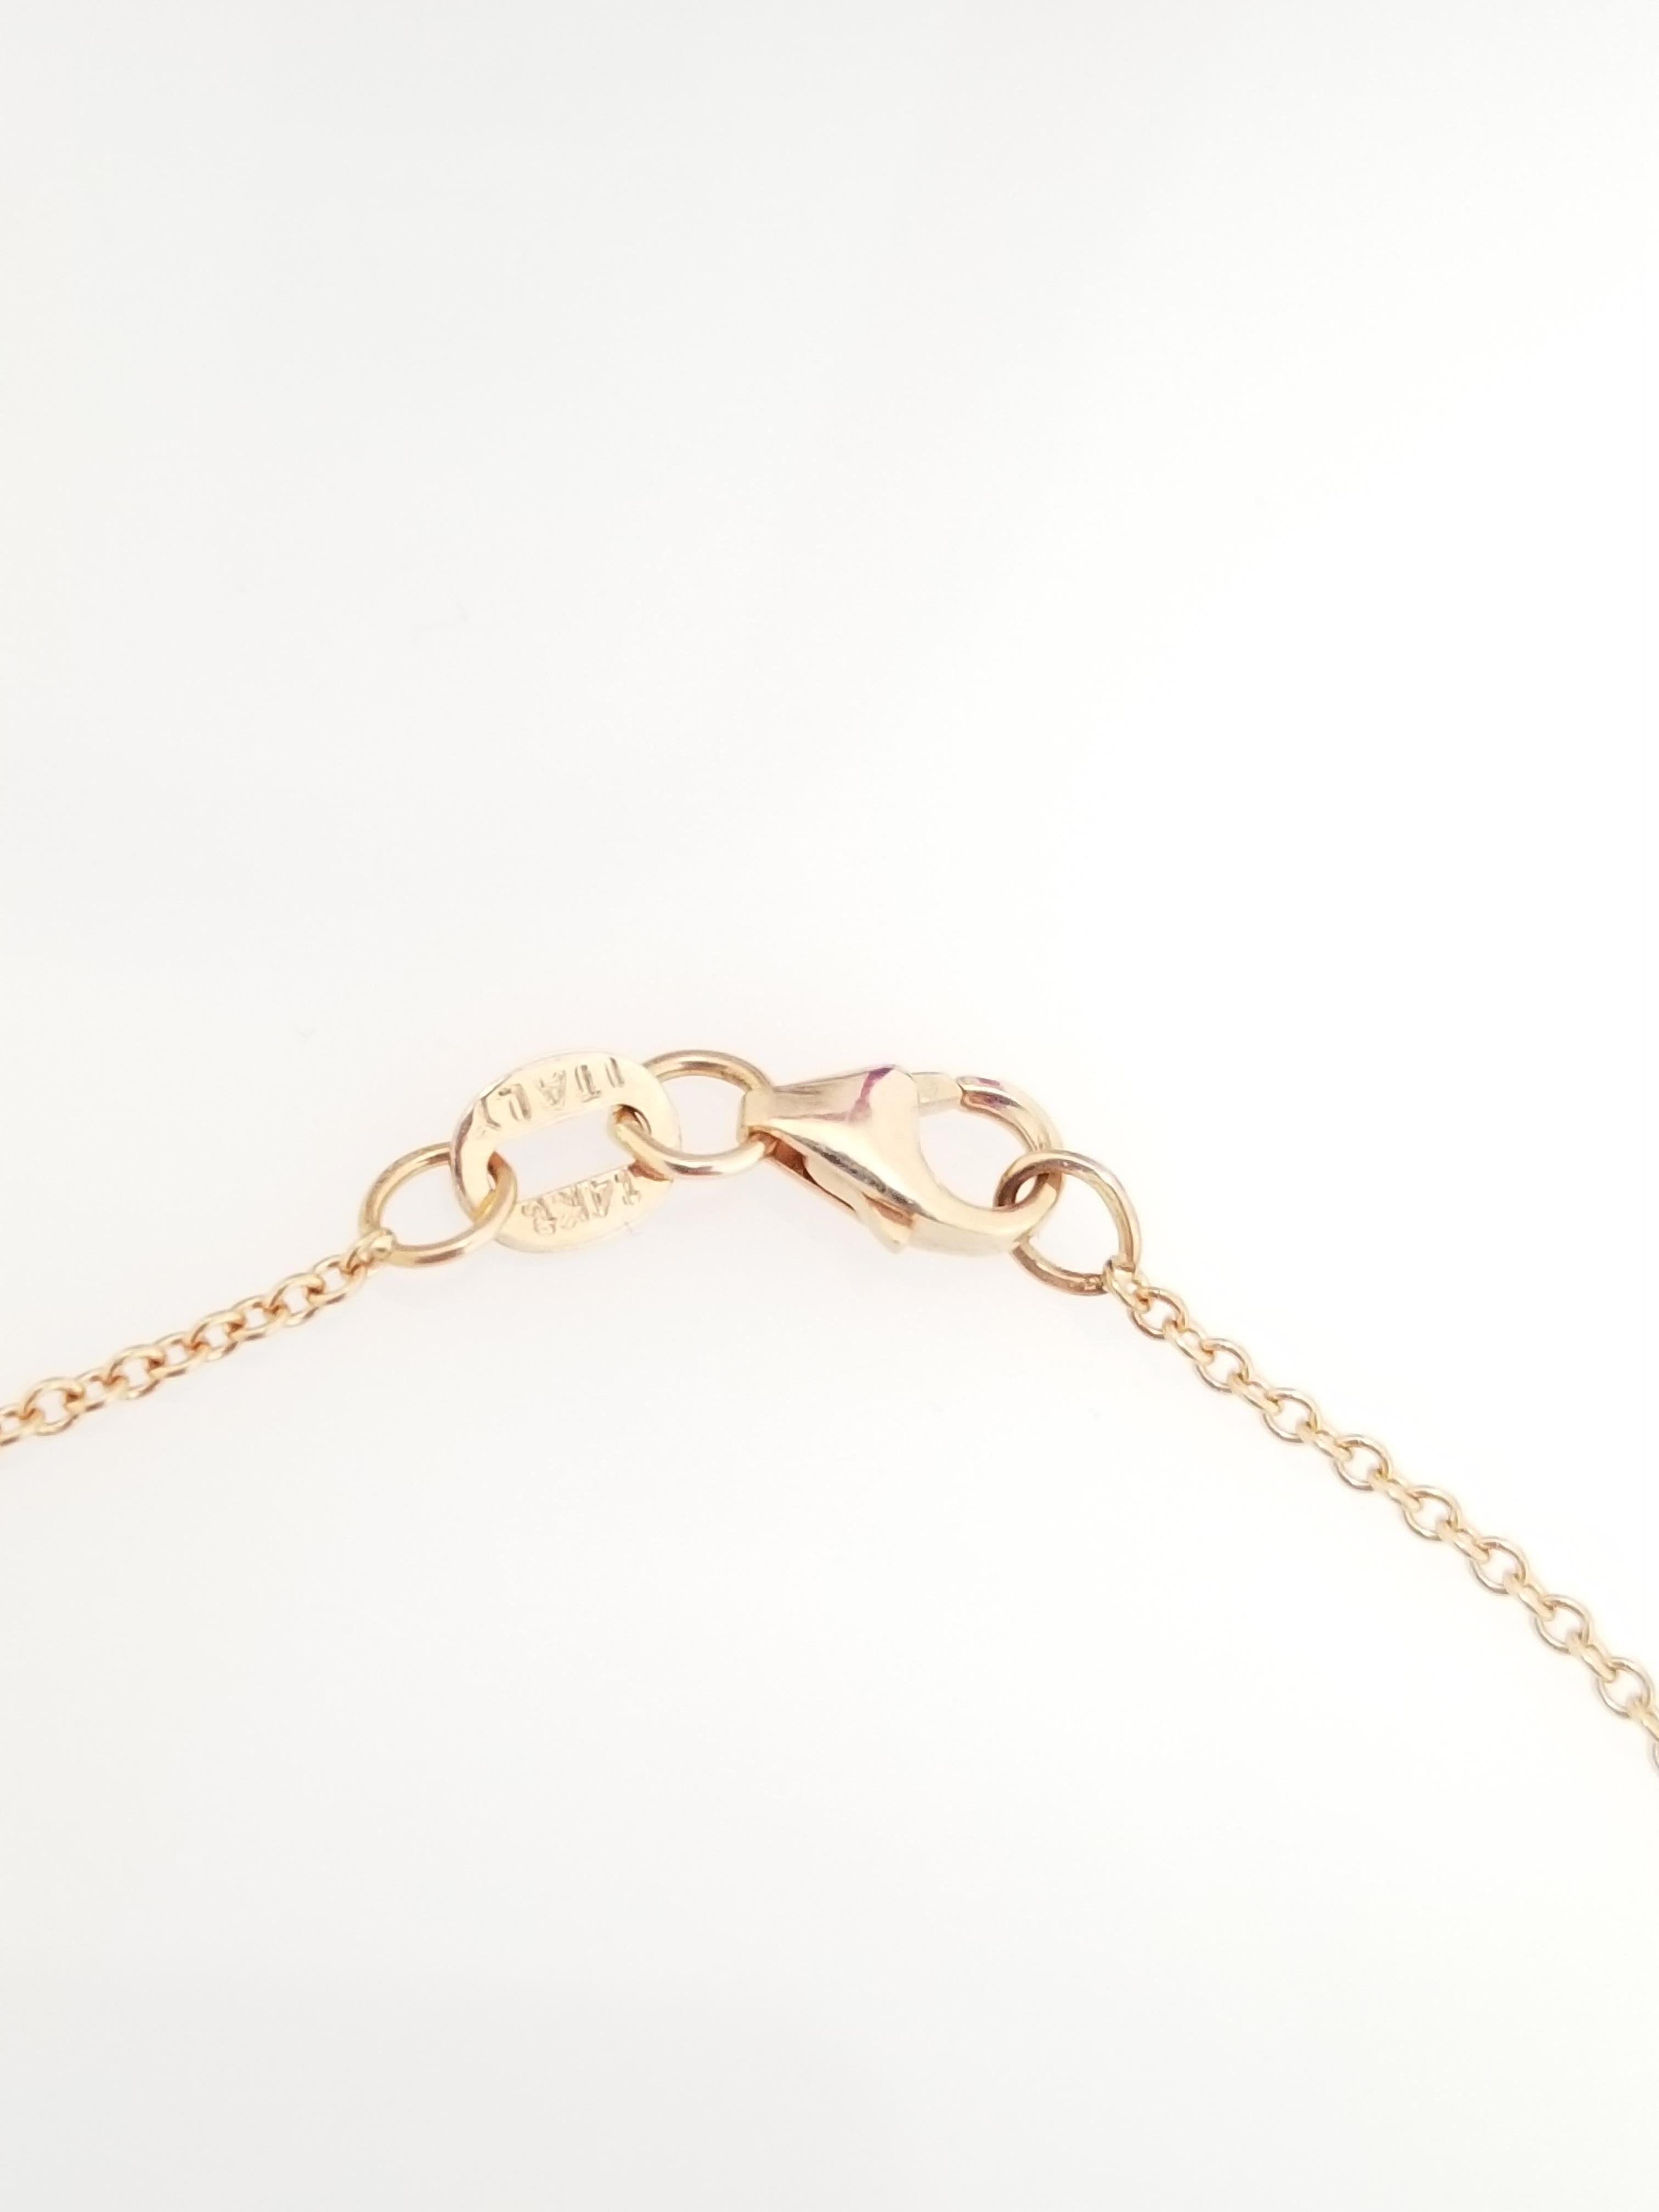 0.32 Carats Single Diamond Station Bracelet in 14 Karat Rose Gold In New Condition For Sale In Great Neck, NY